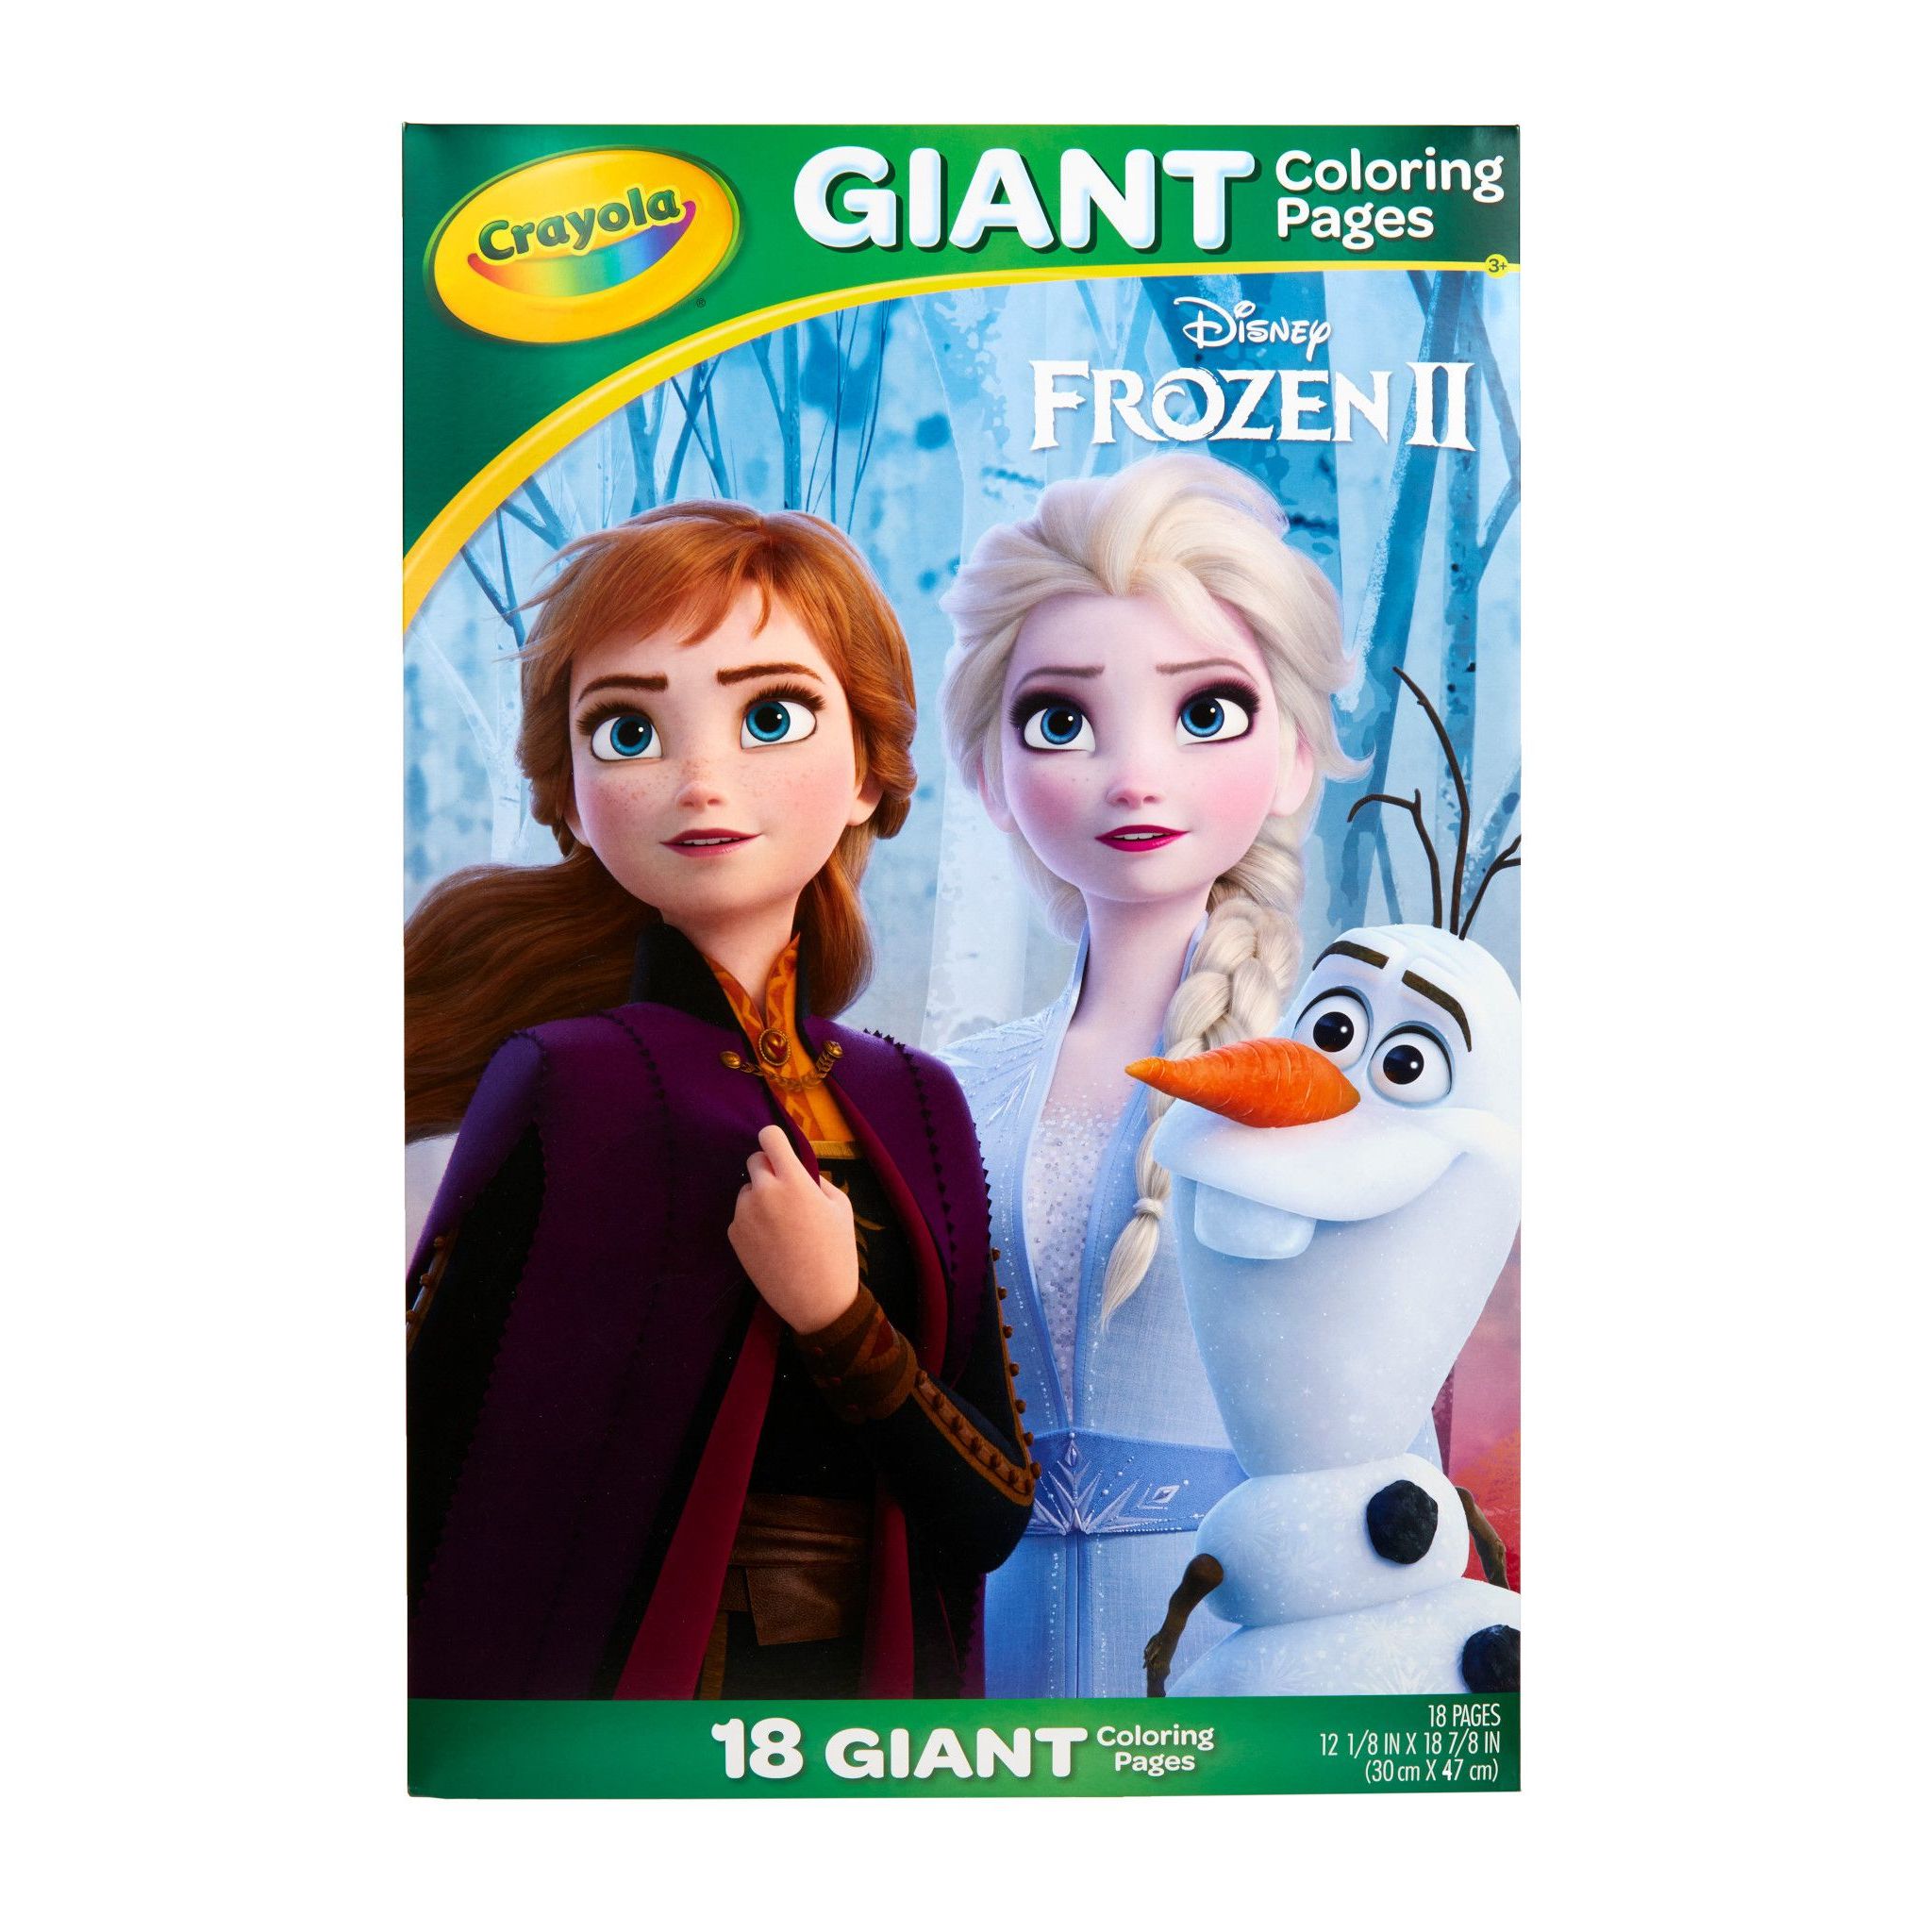 Crayola Giant Coloring Featuring Frozen 2, School Supplies, Child, 18 Pages - image 1 of 5